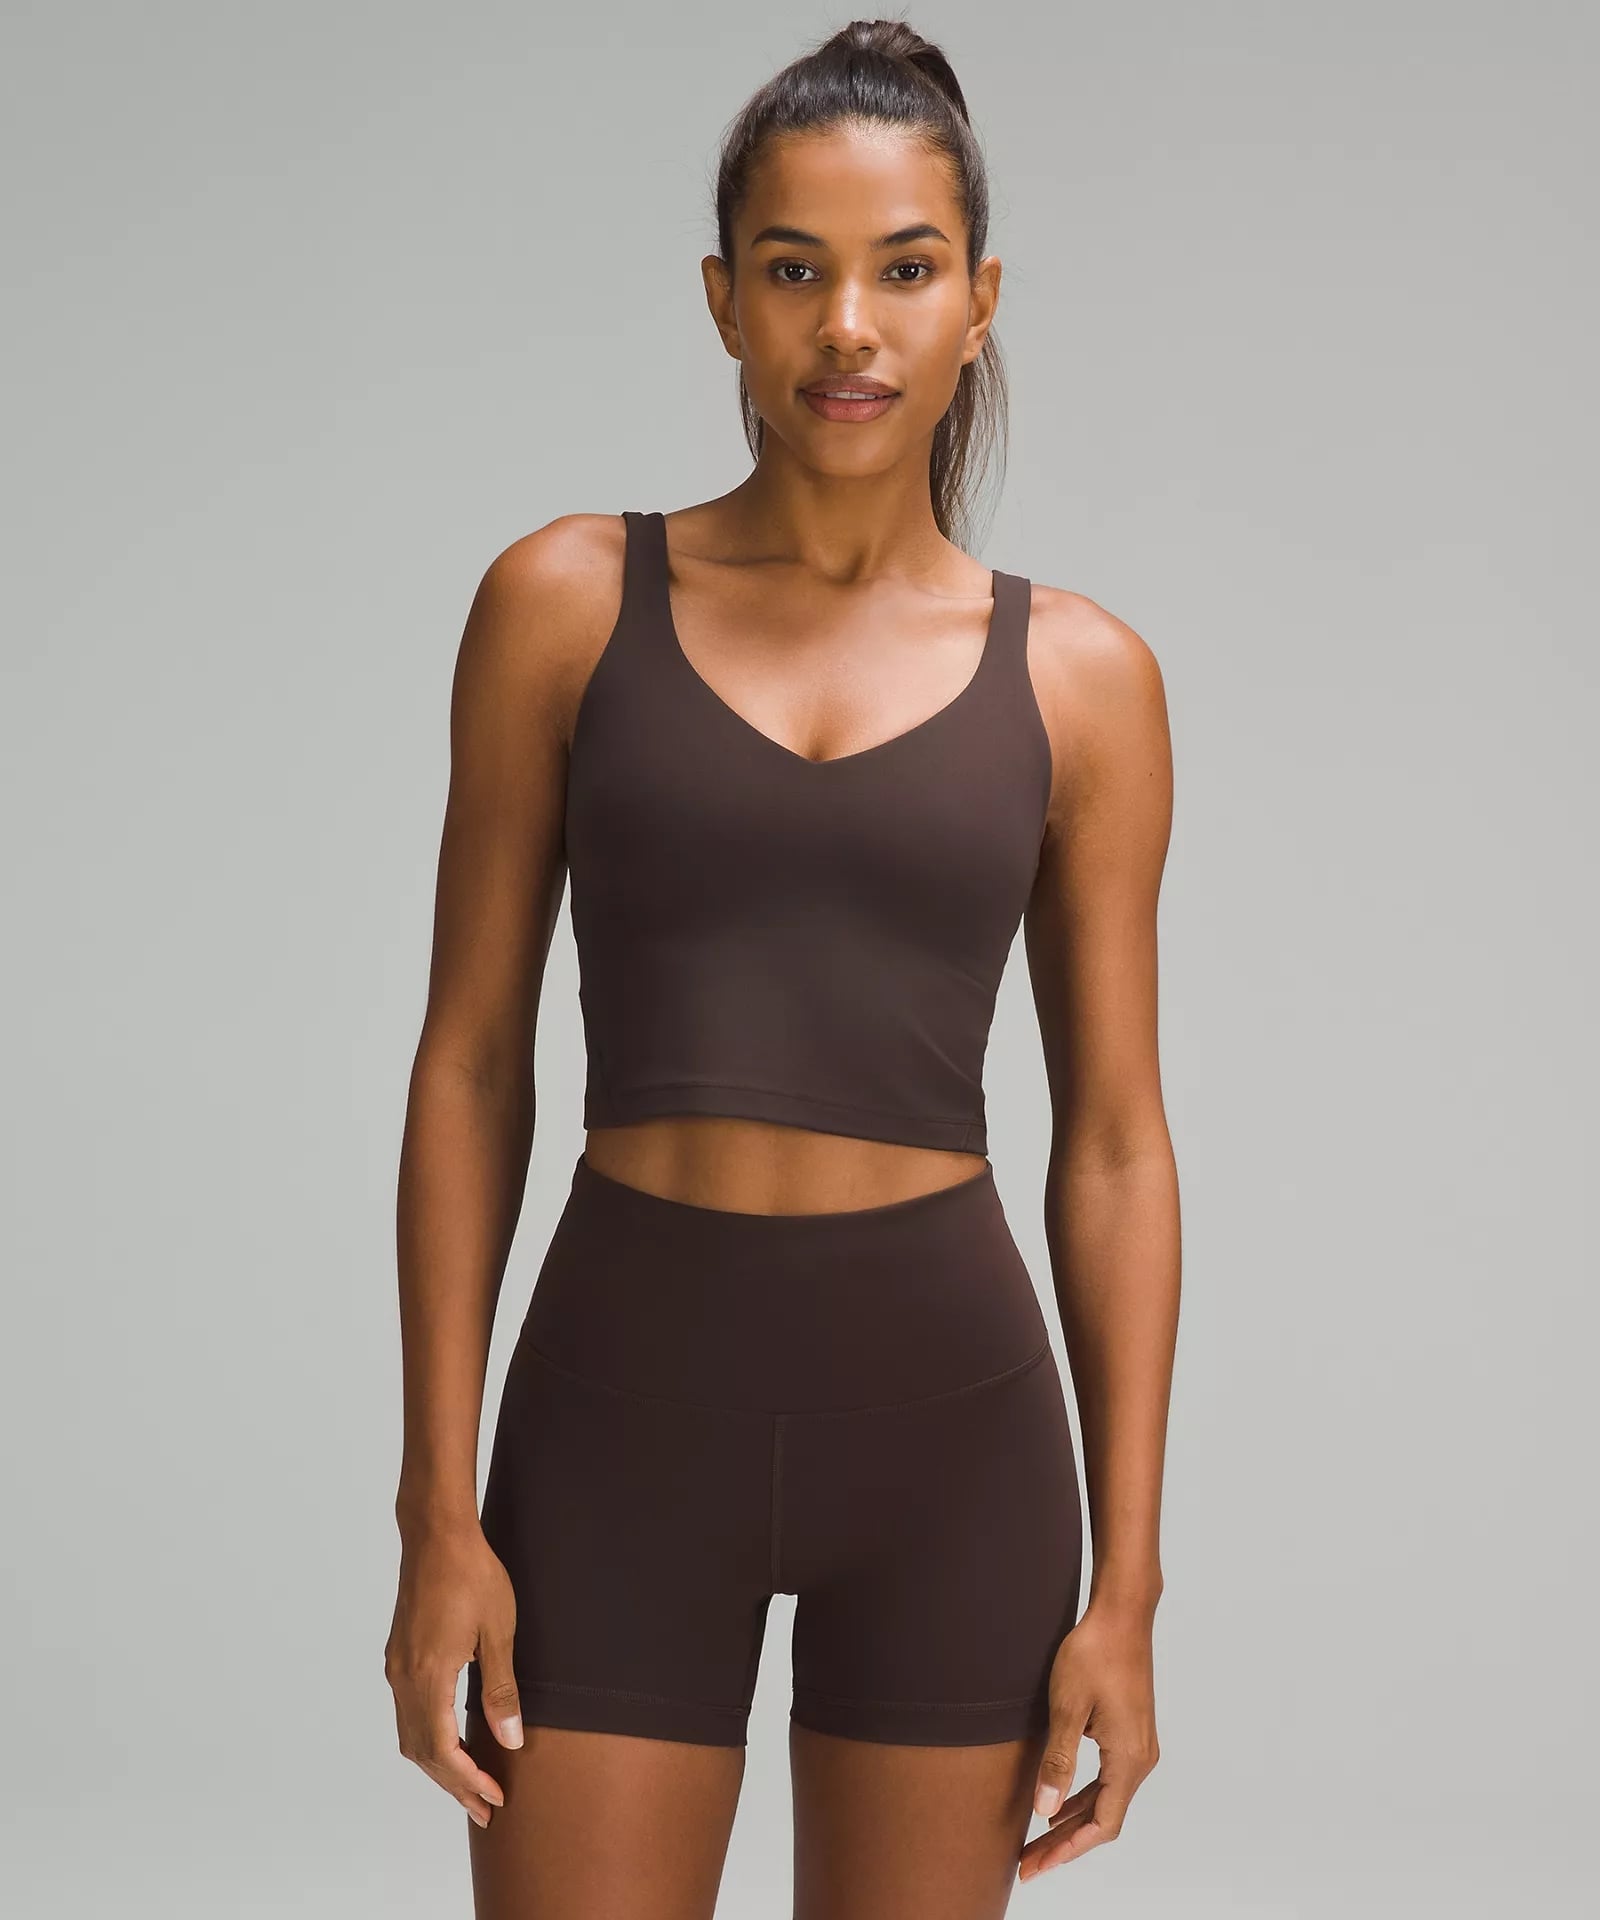 A new lululemon Align matching set is in - lululemon Email Archive